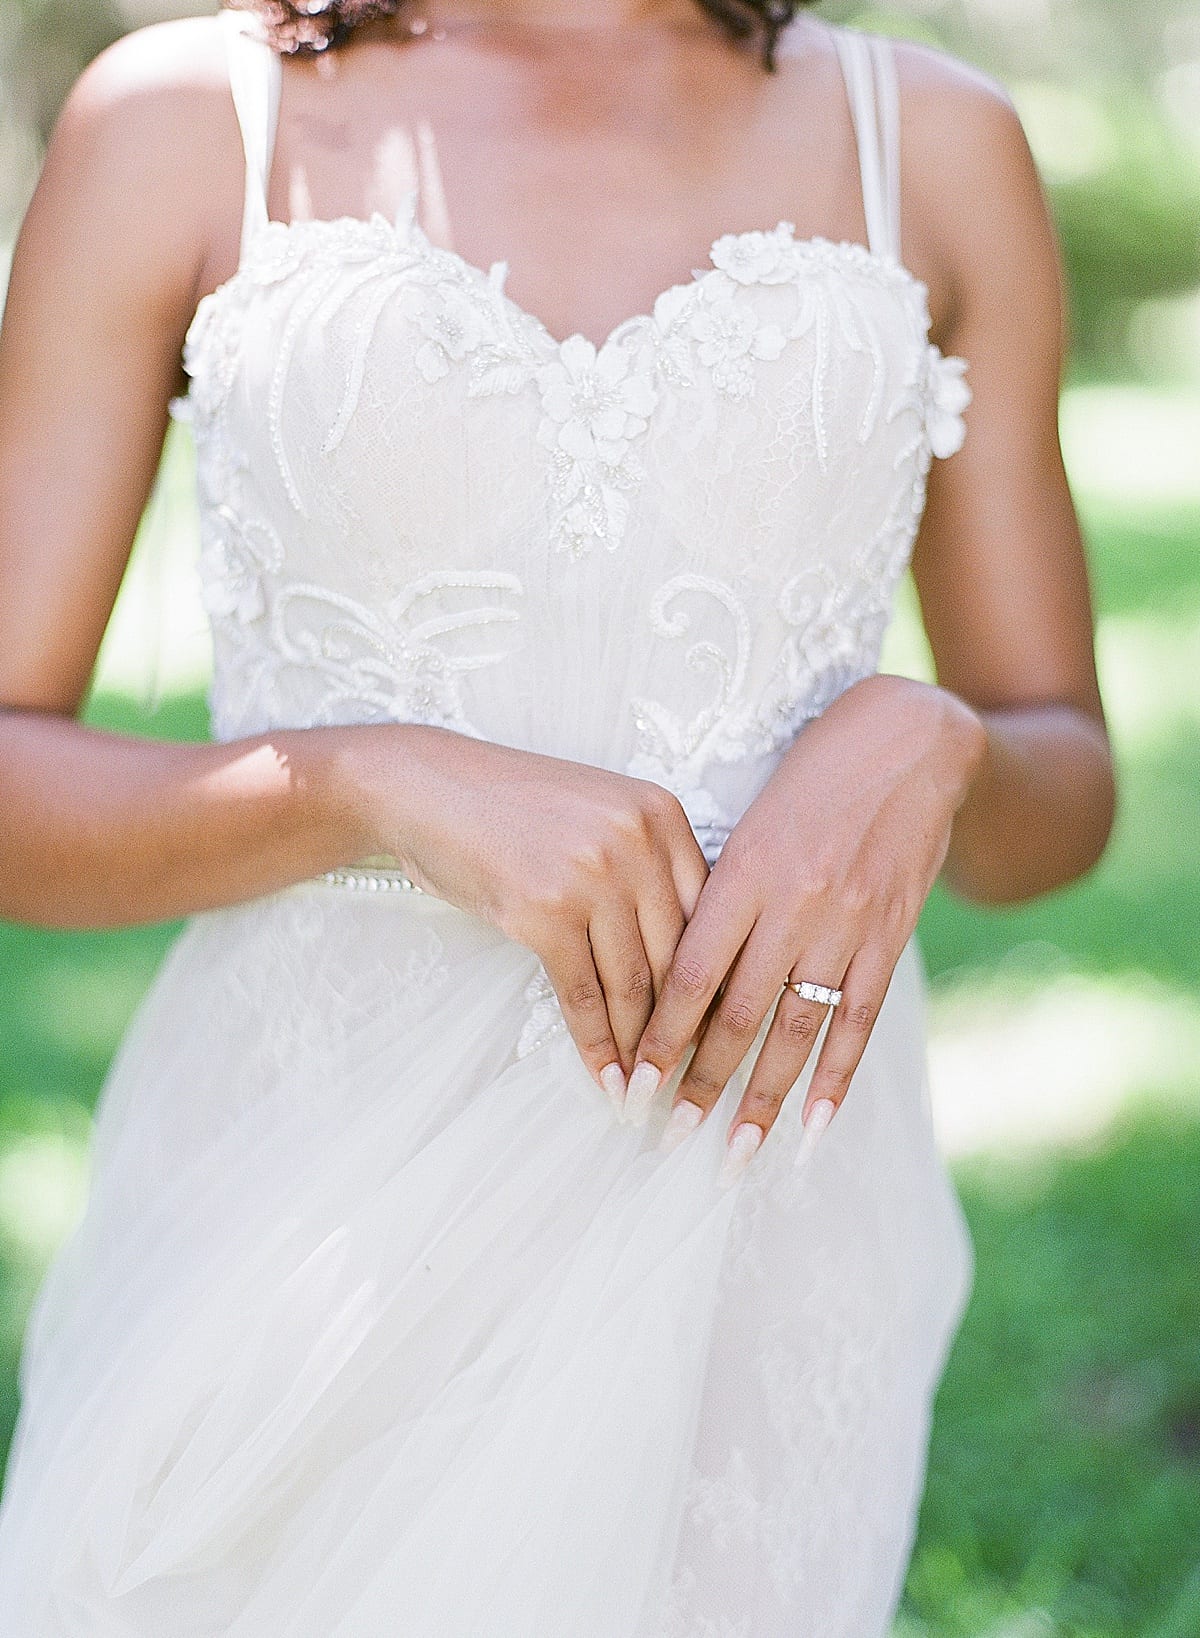 Detail of Brides Bodice with Bride holding Tulle of Dress Photo 